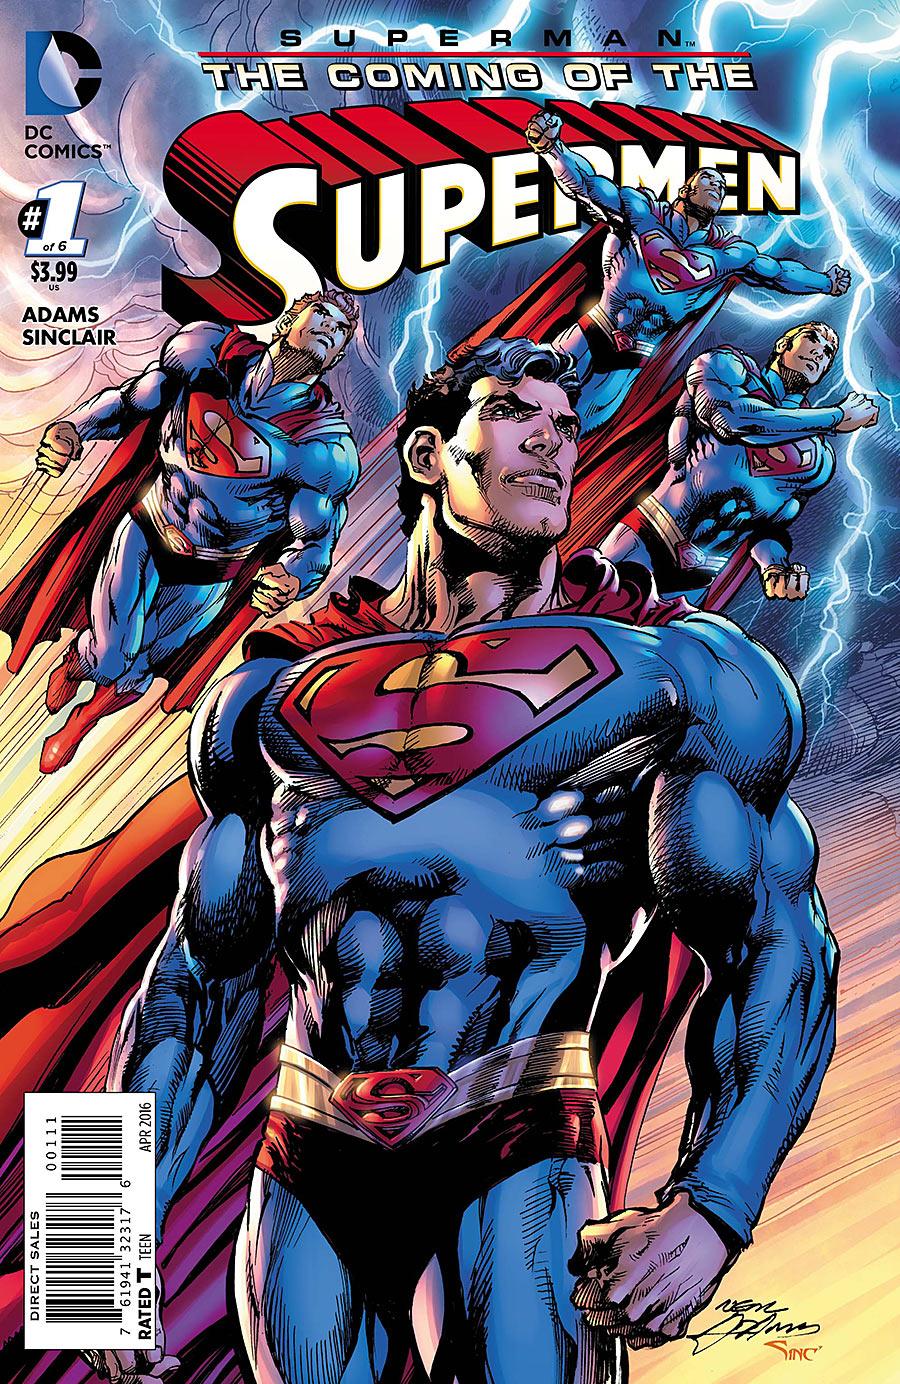 Superman: The Coming of the Supermen Vol. 1 #1